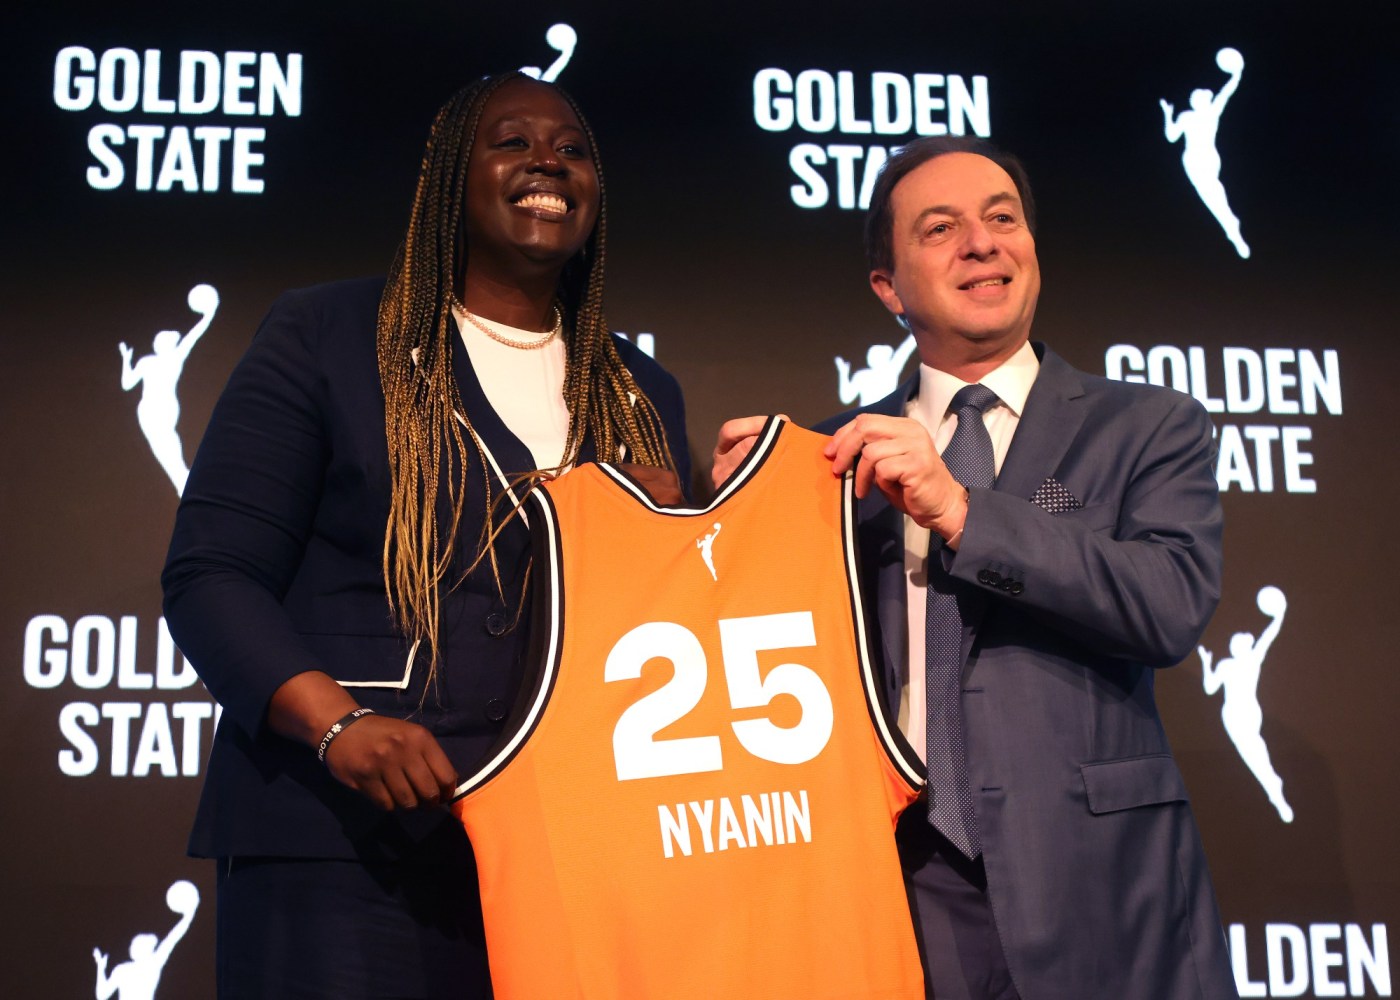 golden-state-wnba-franchise-finds-its-leader,-who-is-already-talking-titles-alongside-lacob